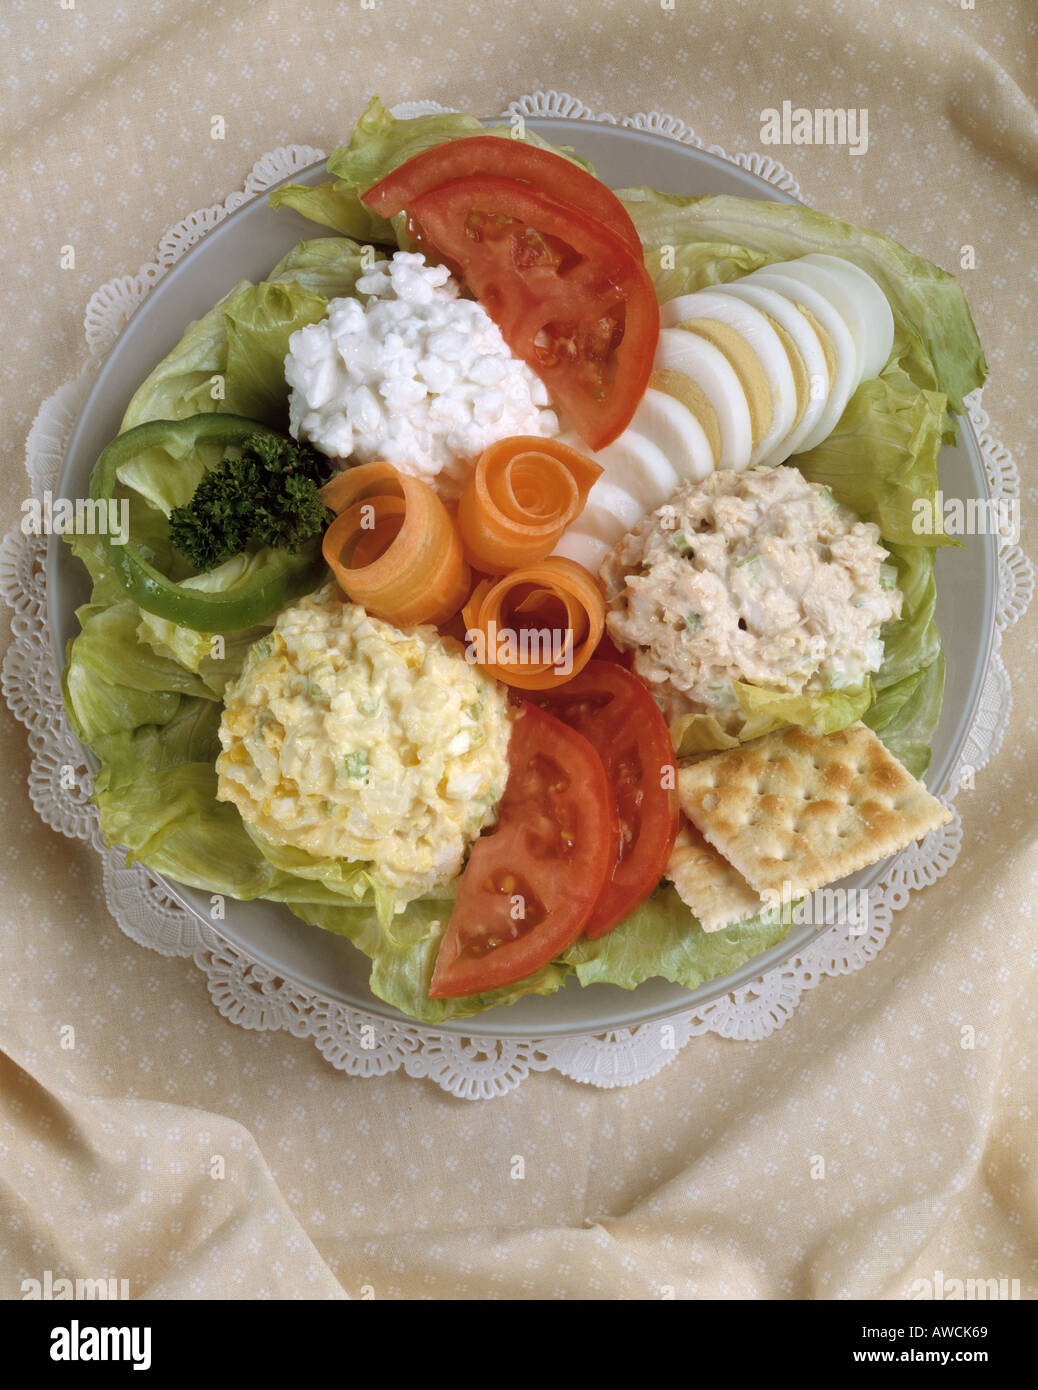 Salad Combo Chicken Potato Salad Cottage Cheese Hard Boiled Sliced